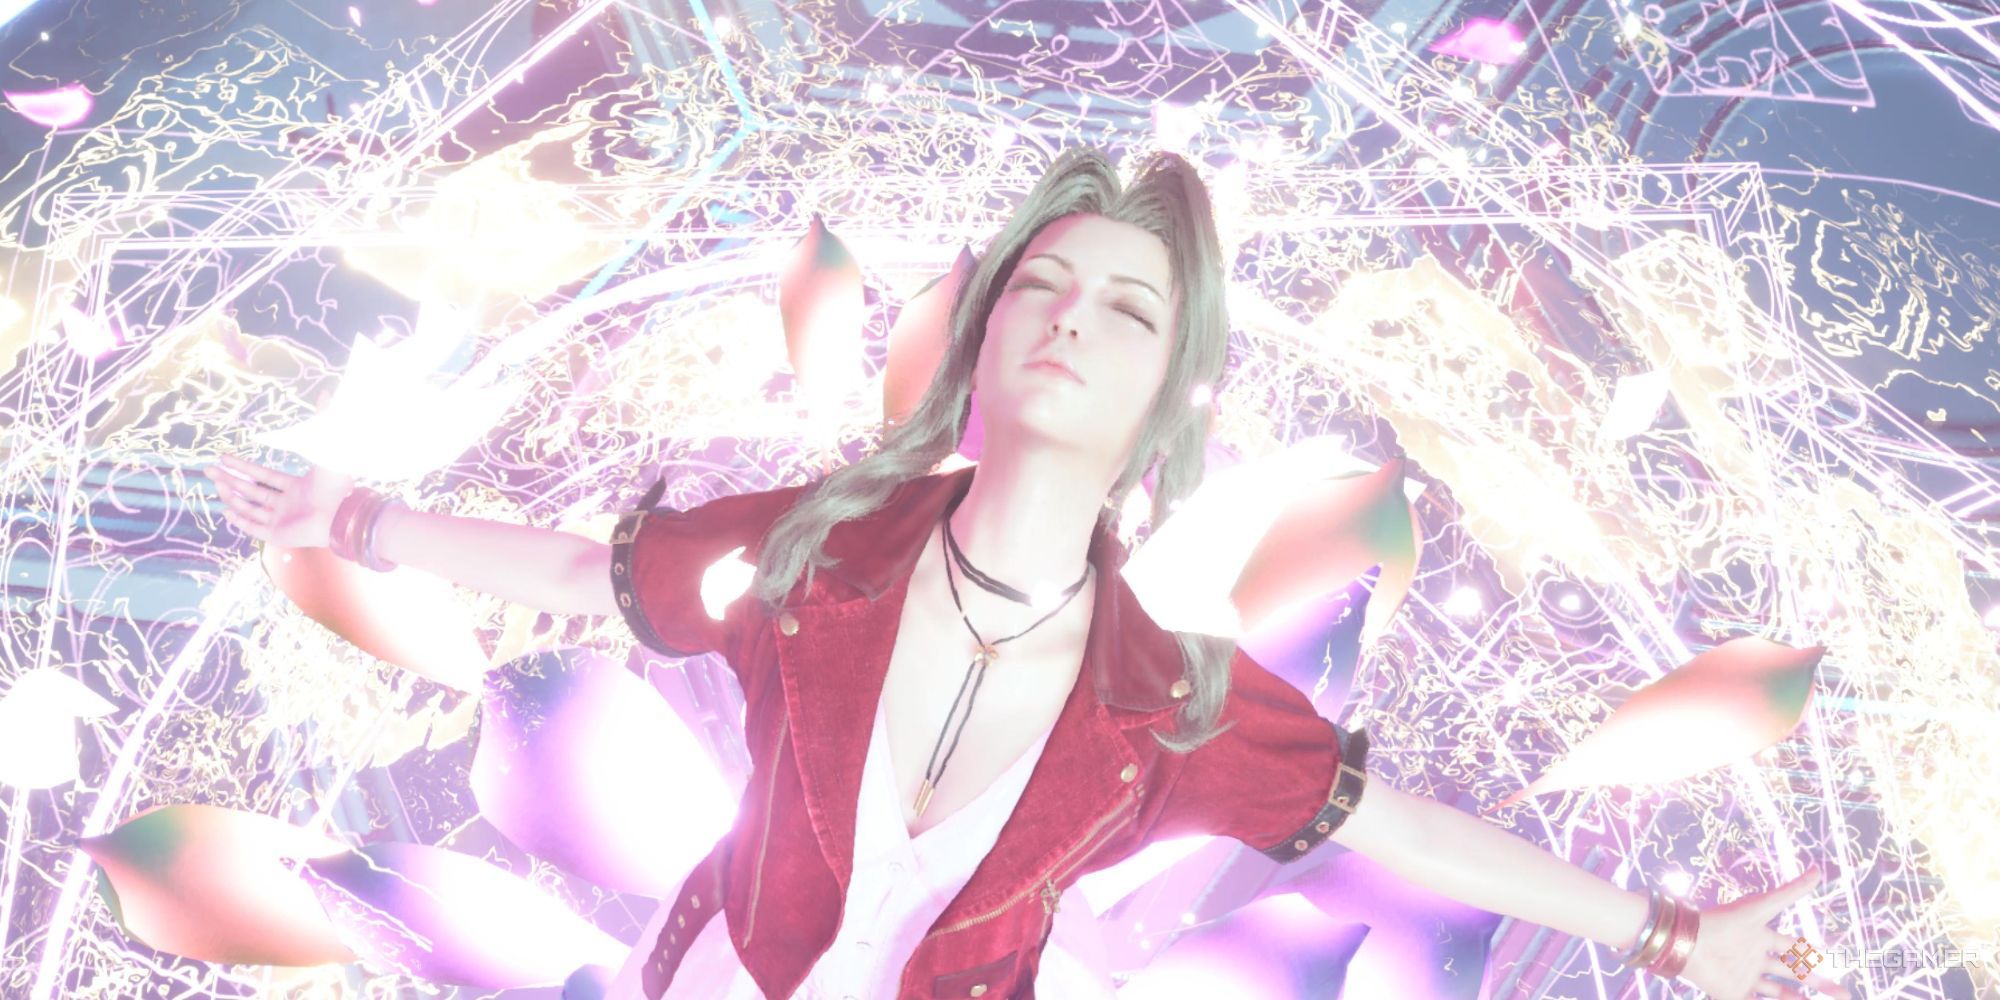 Aerith levitating in the air, preparing to cast Planet's Protection, her level two Limit Break in Final Fantasy 7 Rebirth.